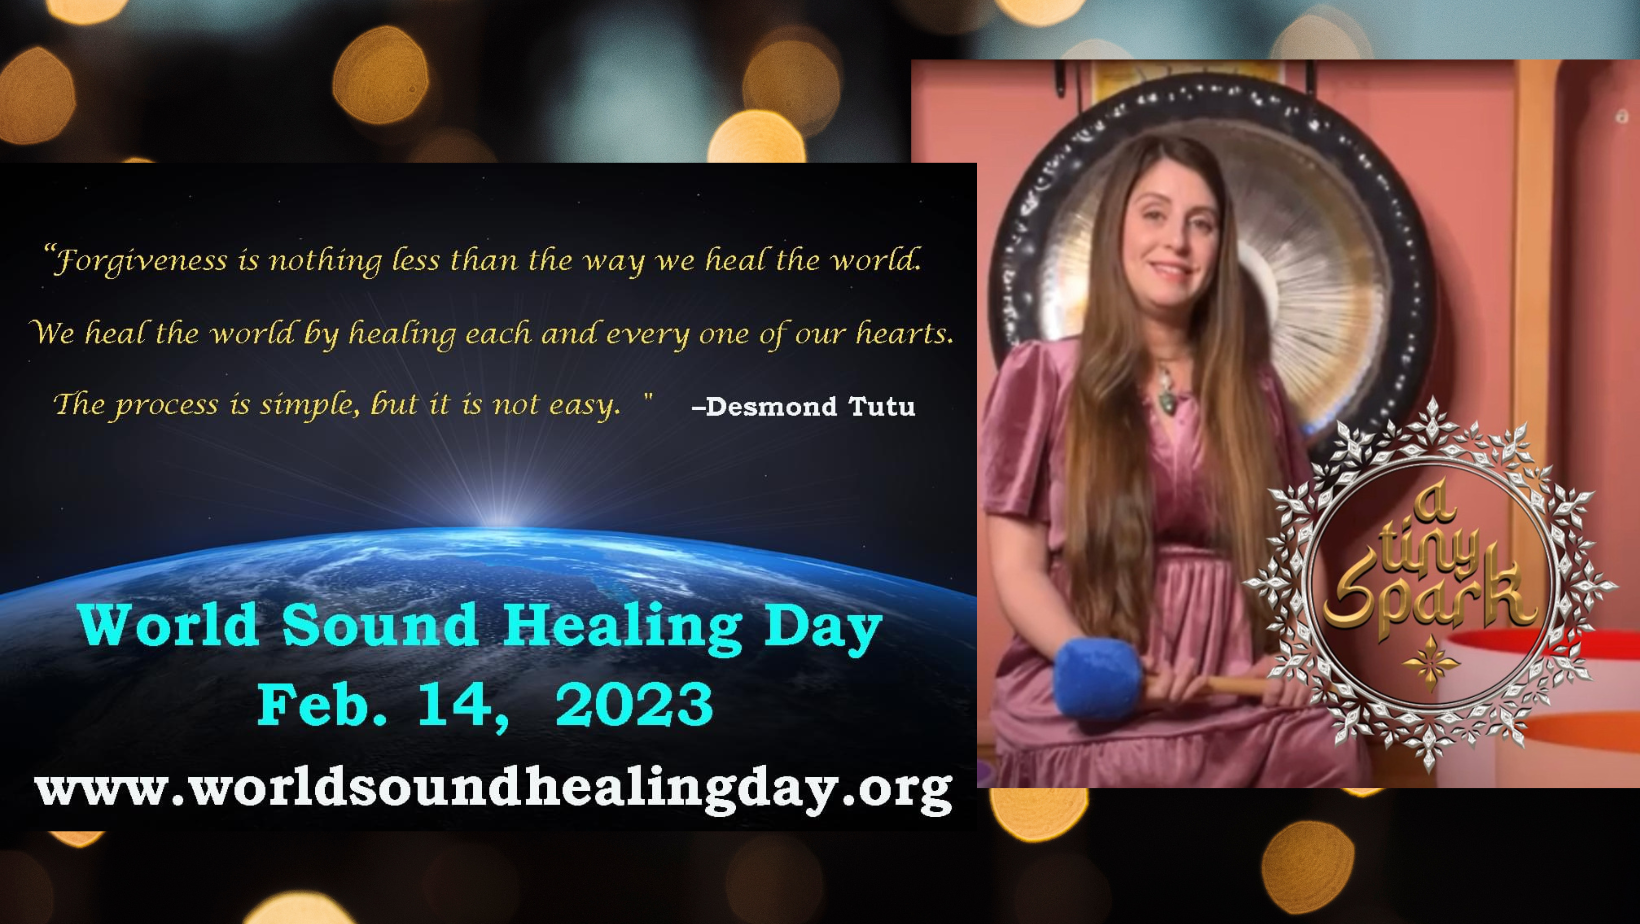 A Tiny Spark for World Sound Healing Day